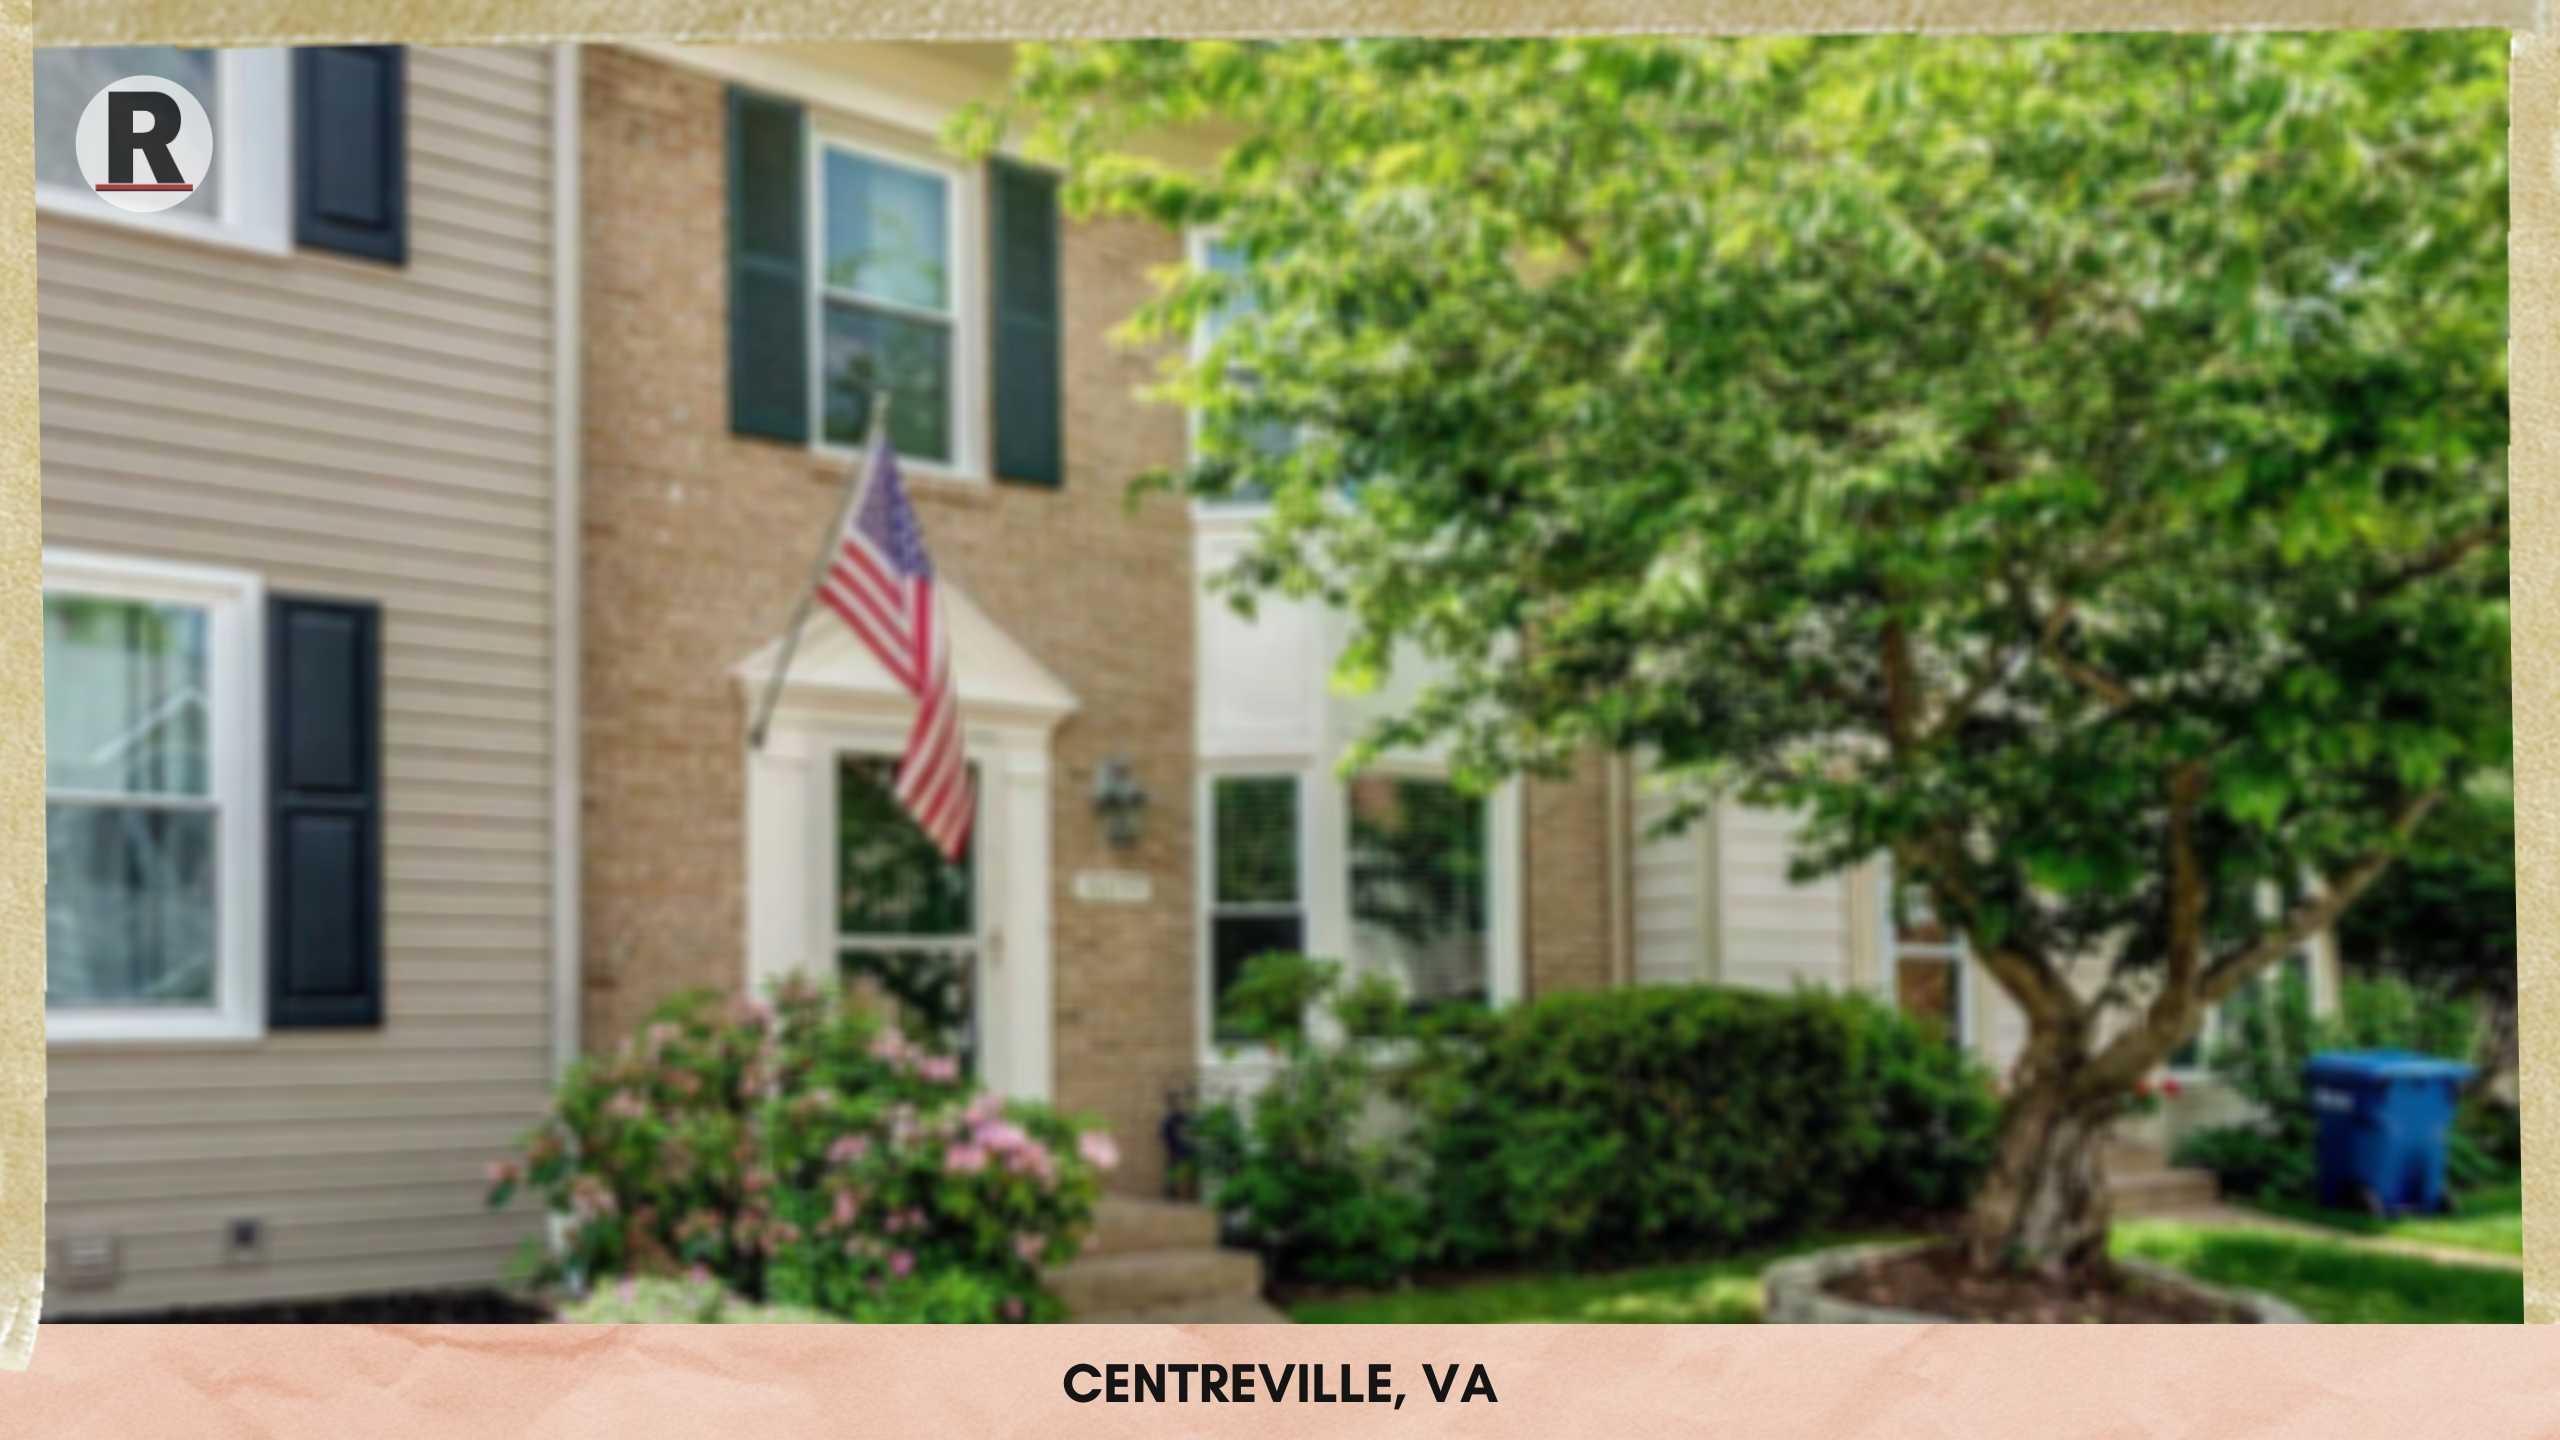 Home in Centreville, VA SOLD for $18,000 OVER ASKING PRICE in 4 DAYS!